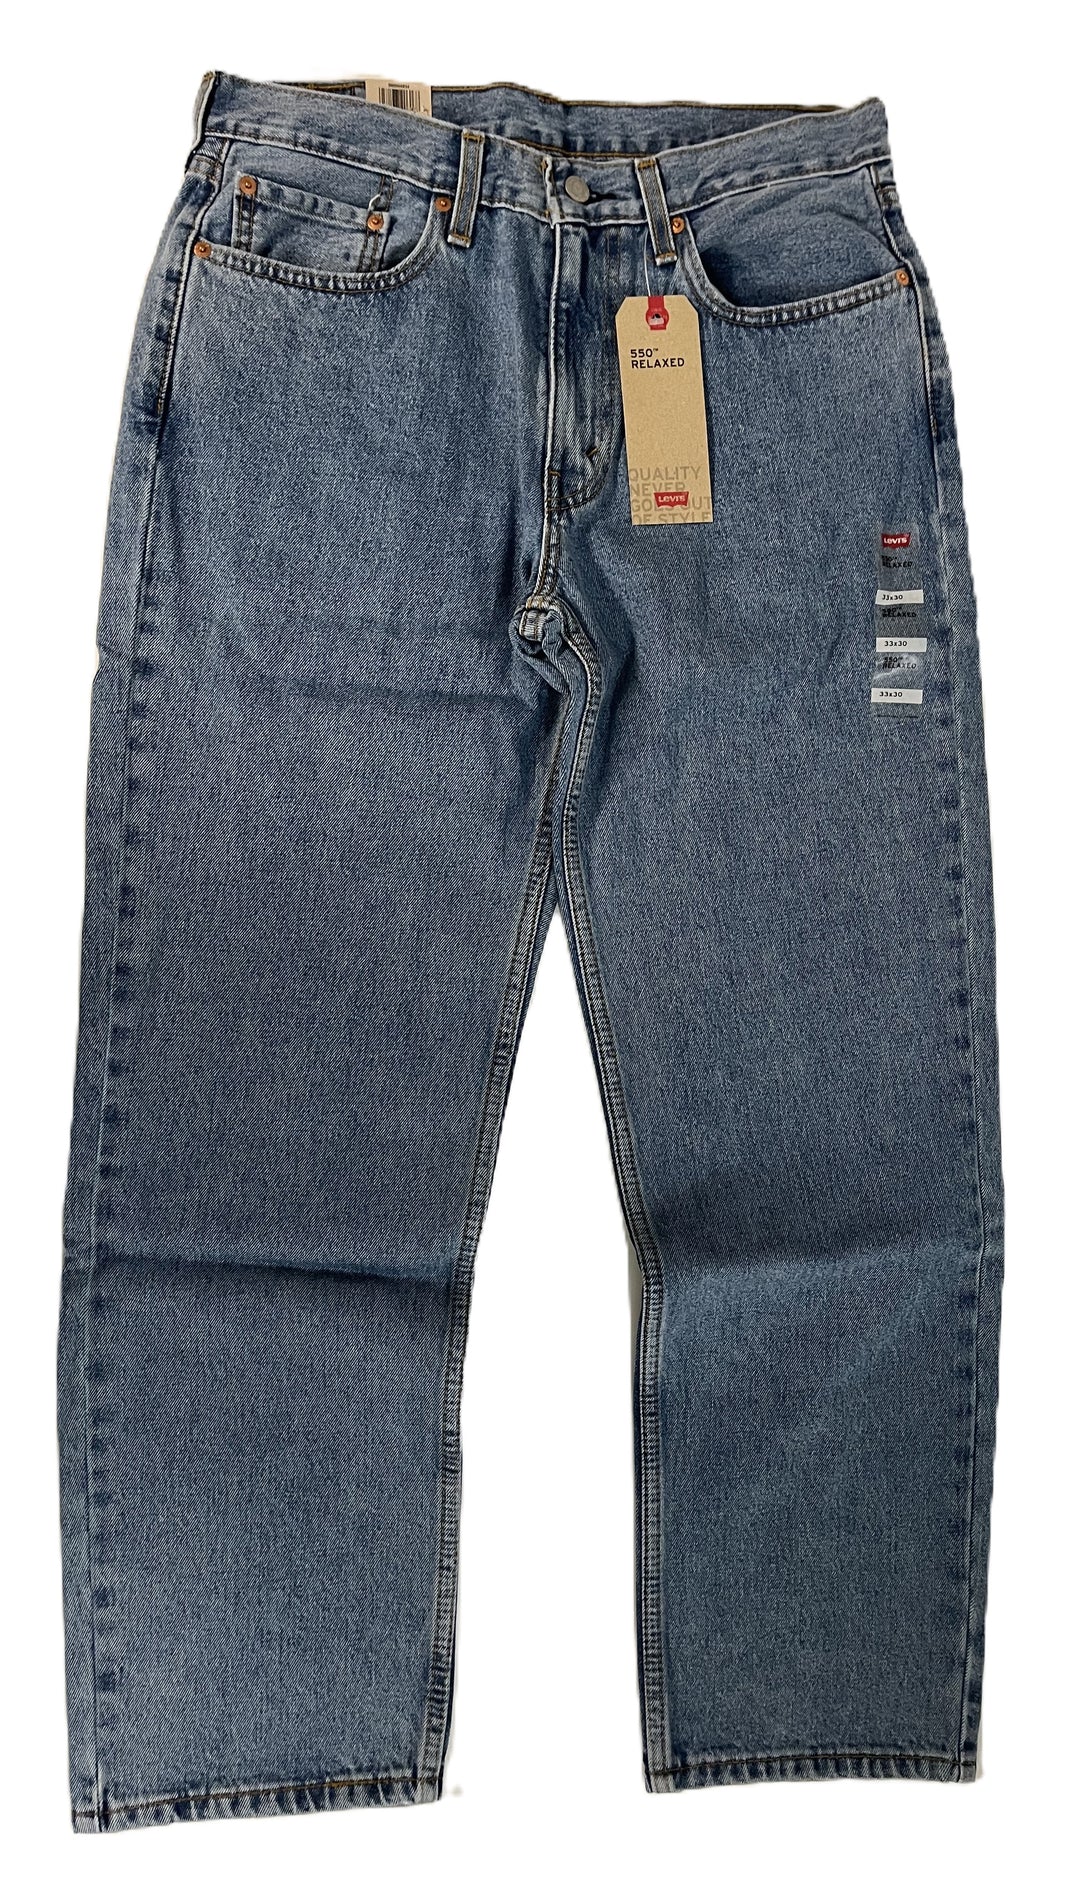 Levi's Men's 550 Relaxed Fit Jeans size 33" W x 30" L